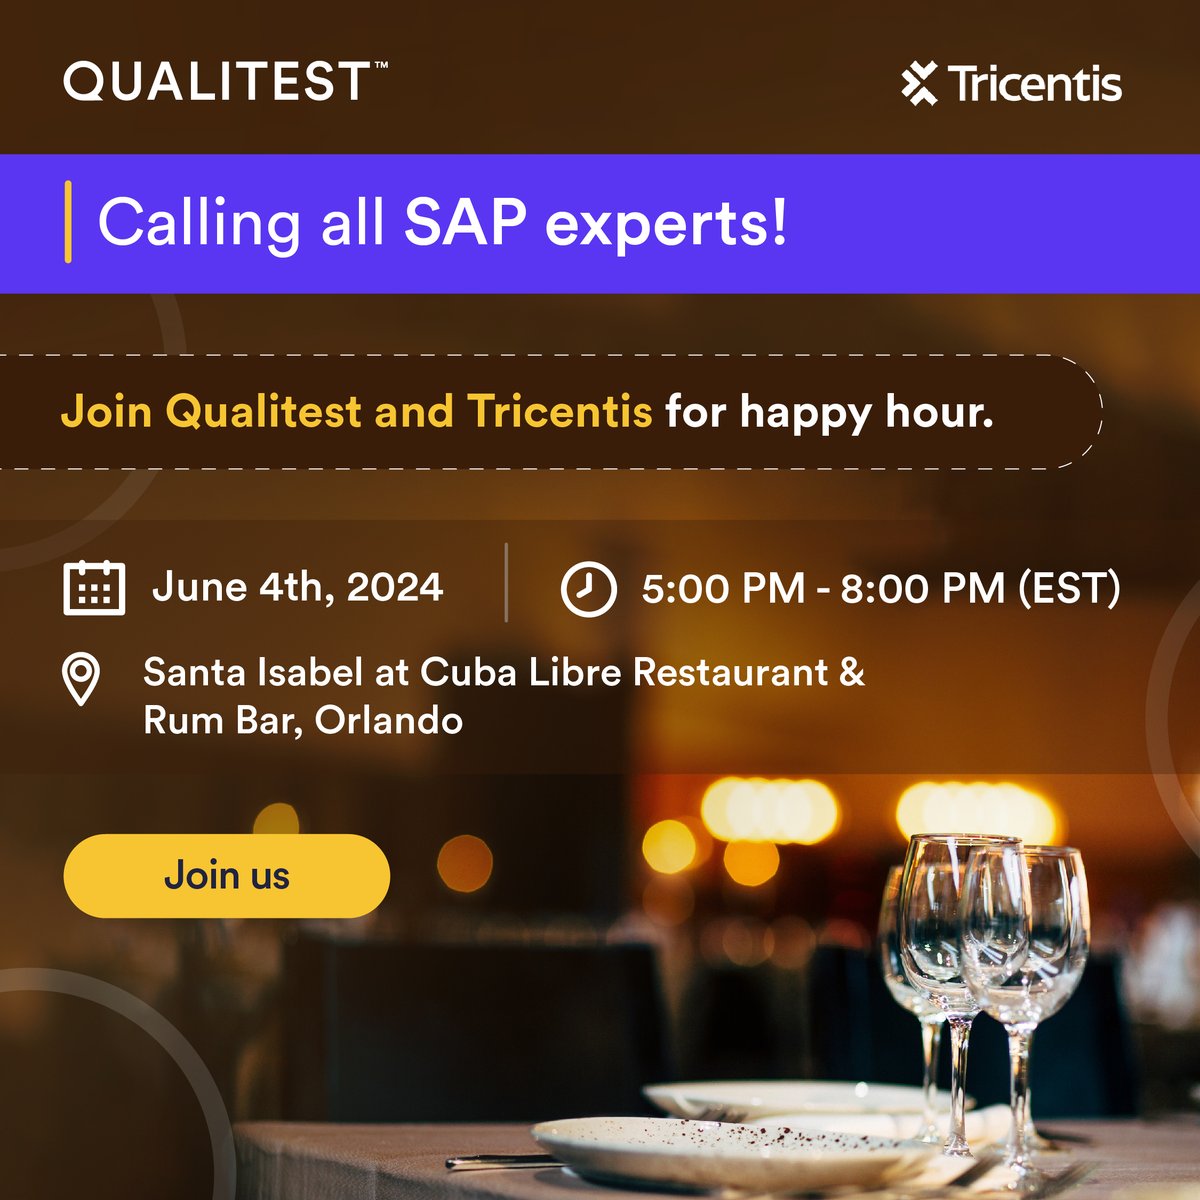 Join us for an exclusive happy hour at Cuba Libre on June 4th, hosted by Qualitest and @Tricentis.
Elevate your SAP projects with top tips and networking opportunities. Don't miss out! 🍹
Register here bit.ly/3vXsqE3
#SAPSapphire #QualitestAtSAPSapphire #LifeAtQualitest